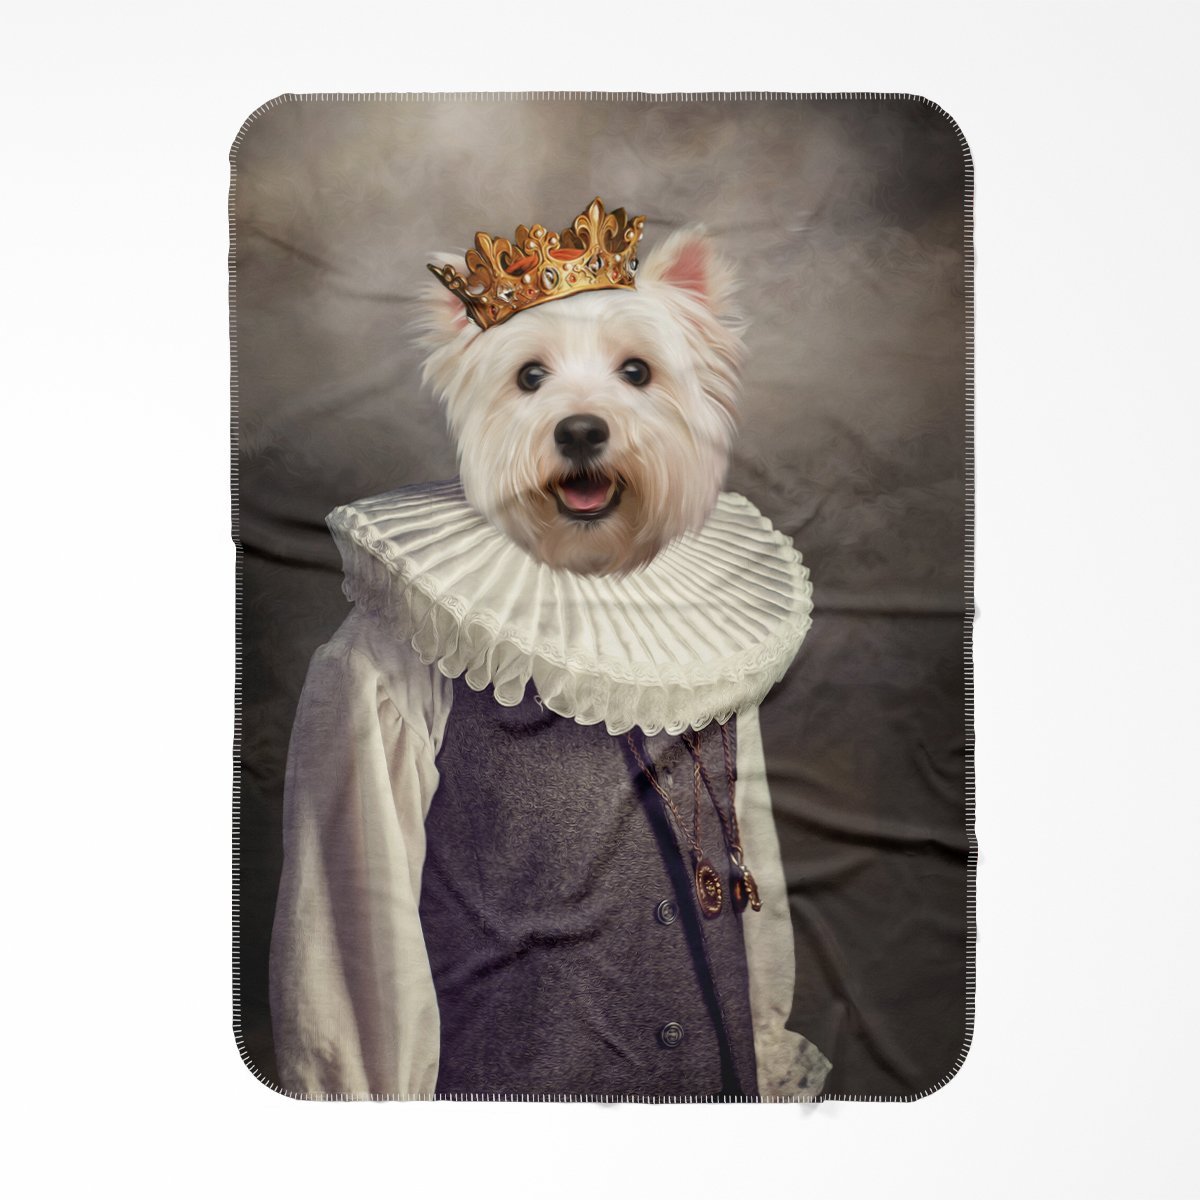 The Young Prince: Custom Pet Blanket - Paw & Glory - #pet portraits# - #dog portraits# - #pet portraits uk#Pawandglory, Pet art blanket,dog picture printed on blanket, custom blanket with dog photo, dog in blankets, dog blankets with names, dog print fleece blanket